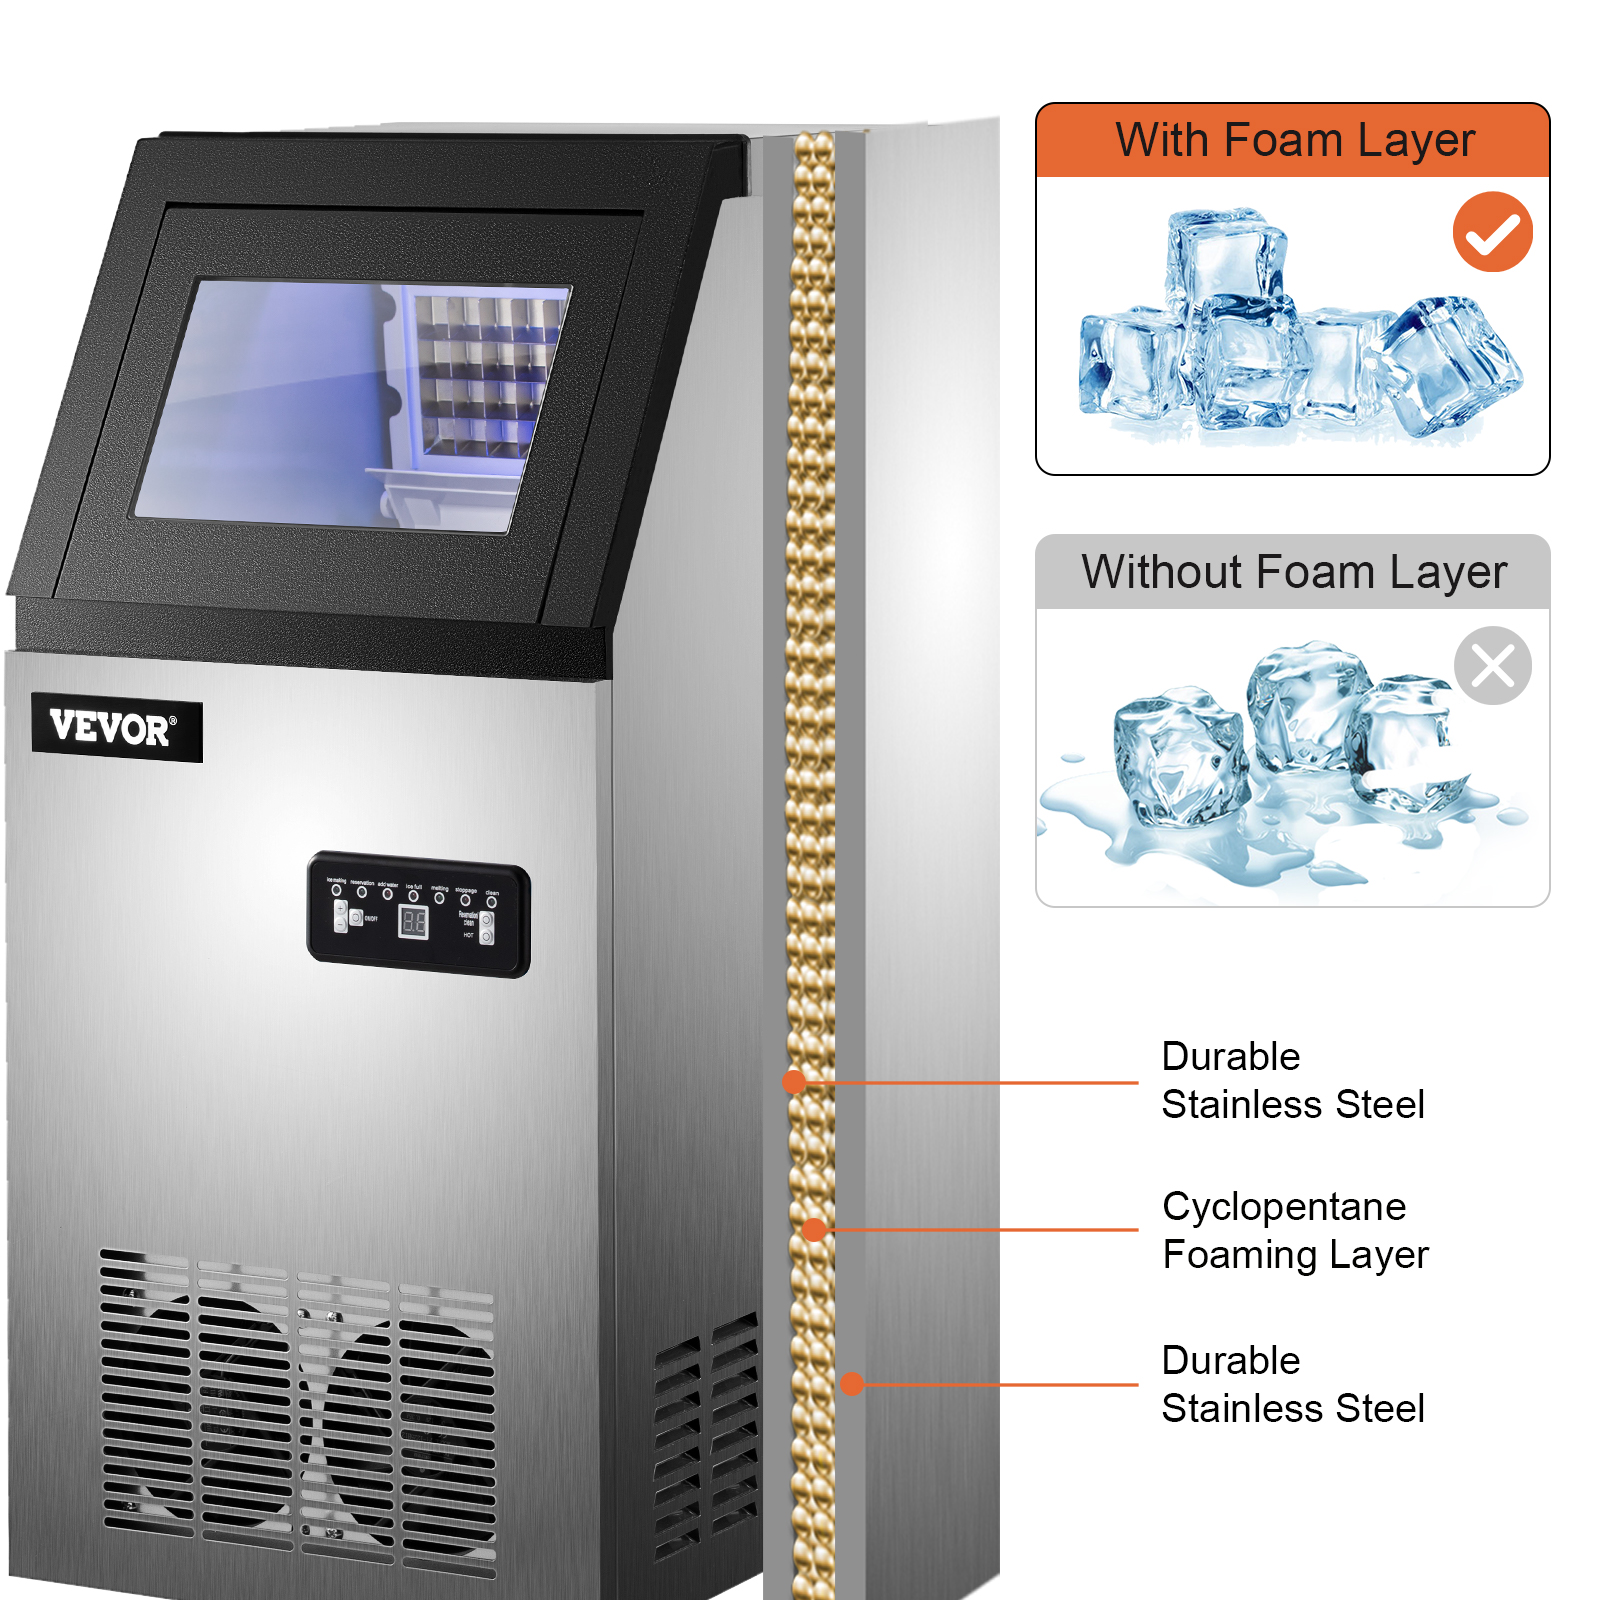 VEVOR 110V Commercial ice Maker Machine 155LBS/24H with 39LBS Bin and  Electric Water Drain Pump, Stainless Steel Ice Machine, Auto Operation,  Include Water Filter 2 Scoops and Connection Hose